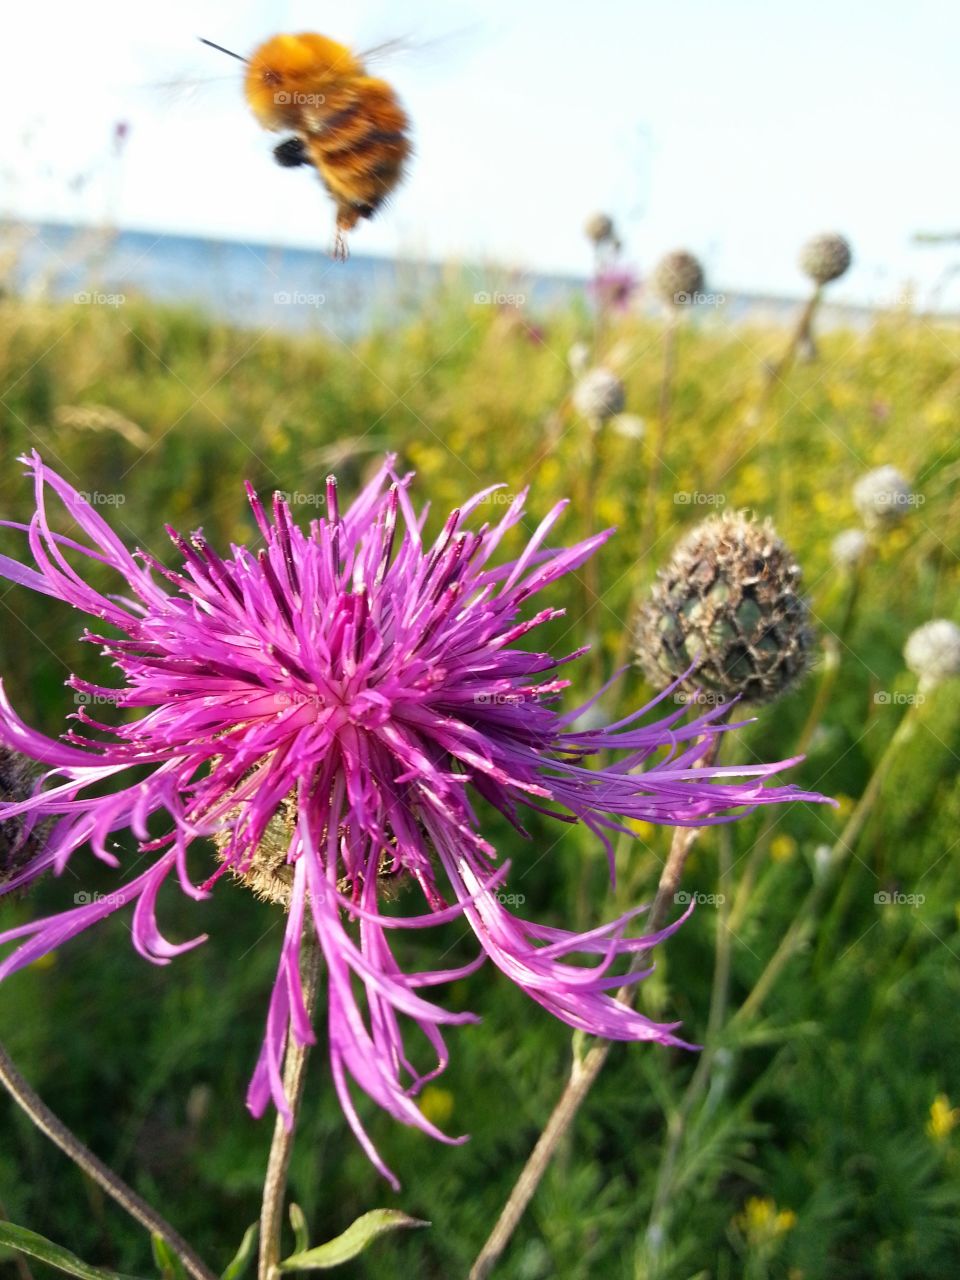 flower and a bumblebee